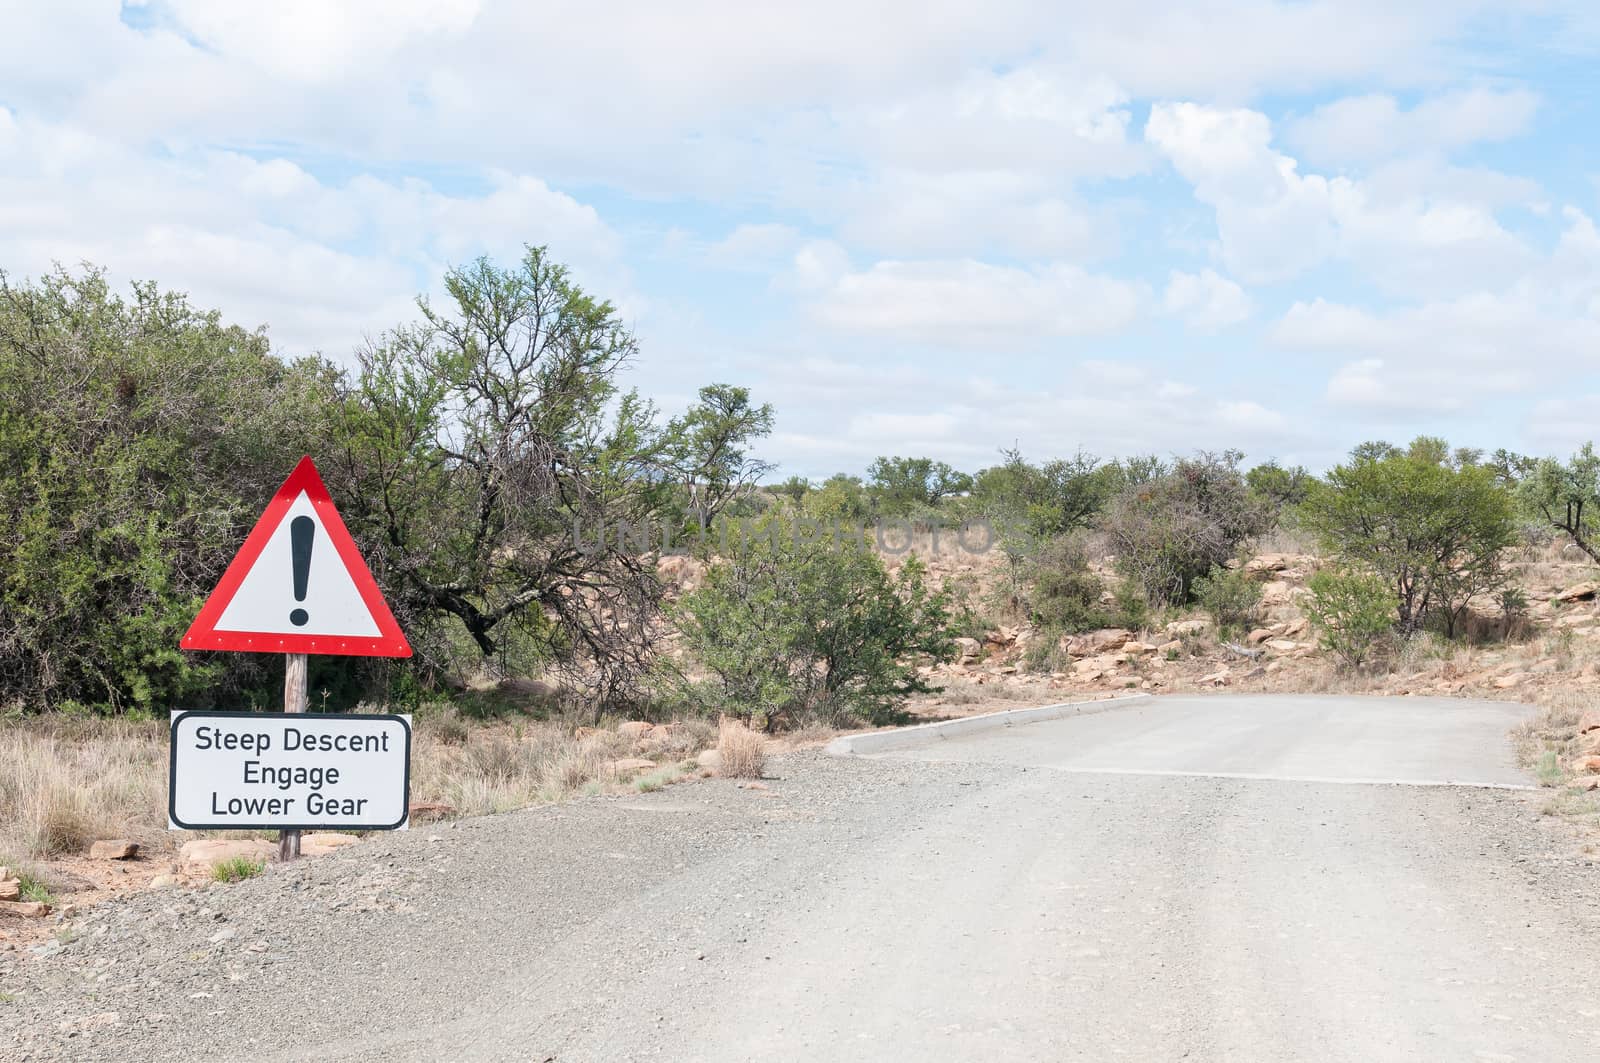 A steep descend warning on the link road in the Mountain Zebra National Park near Cradock in South Africa